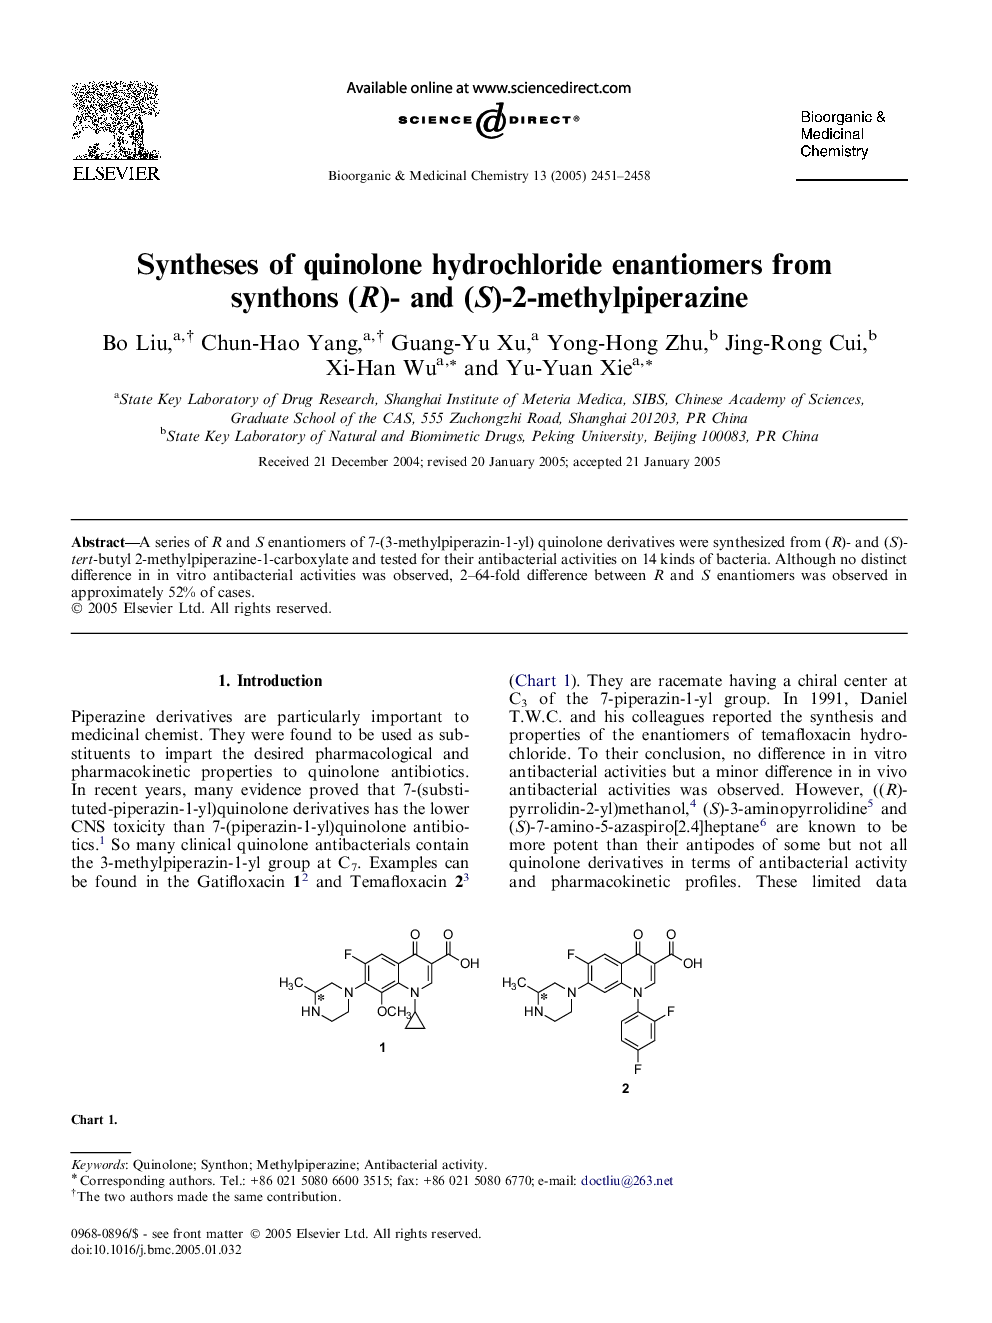 Syntheses of quinolone hydrochloride enantiomers from synthons (R)- and (S)-2-methylpiperazine